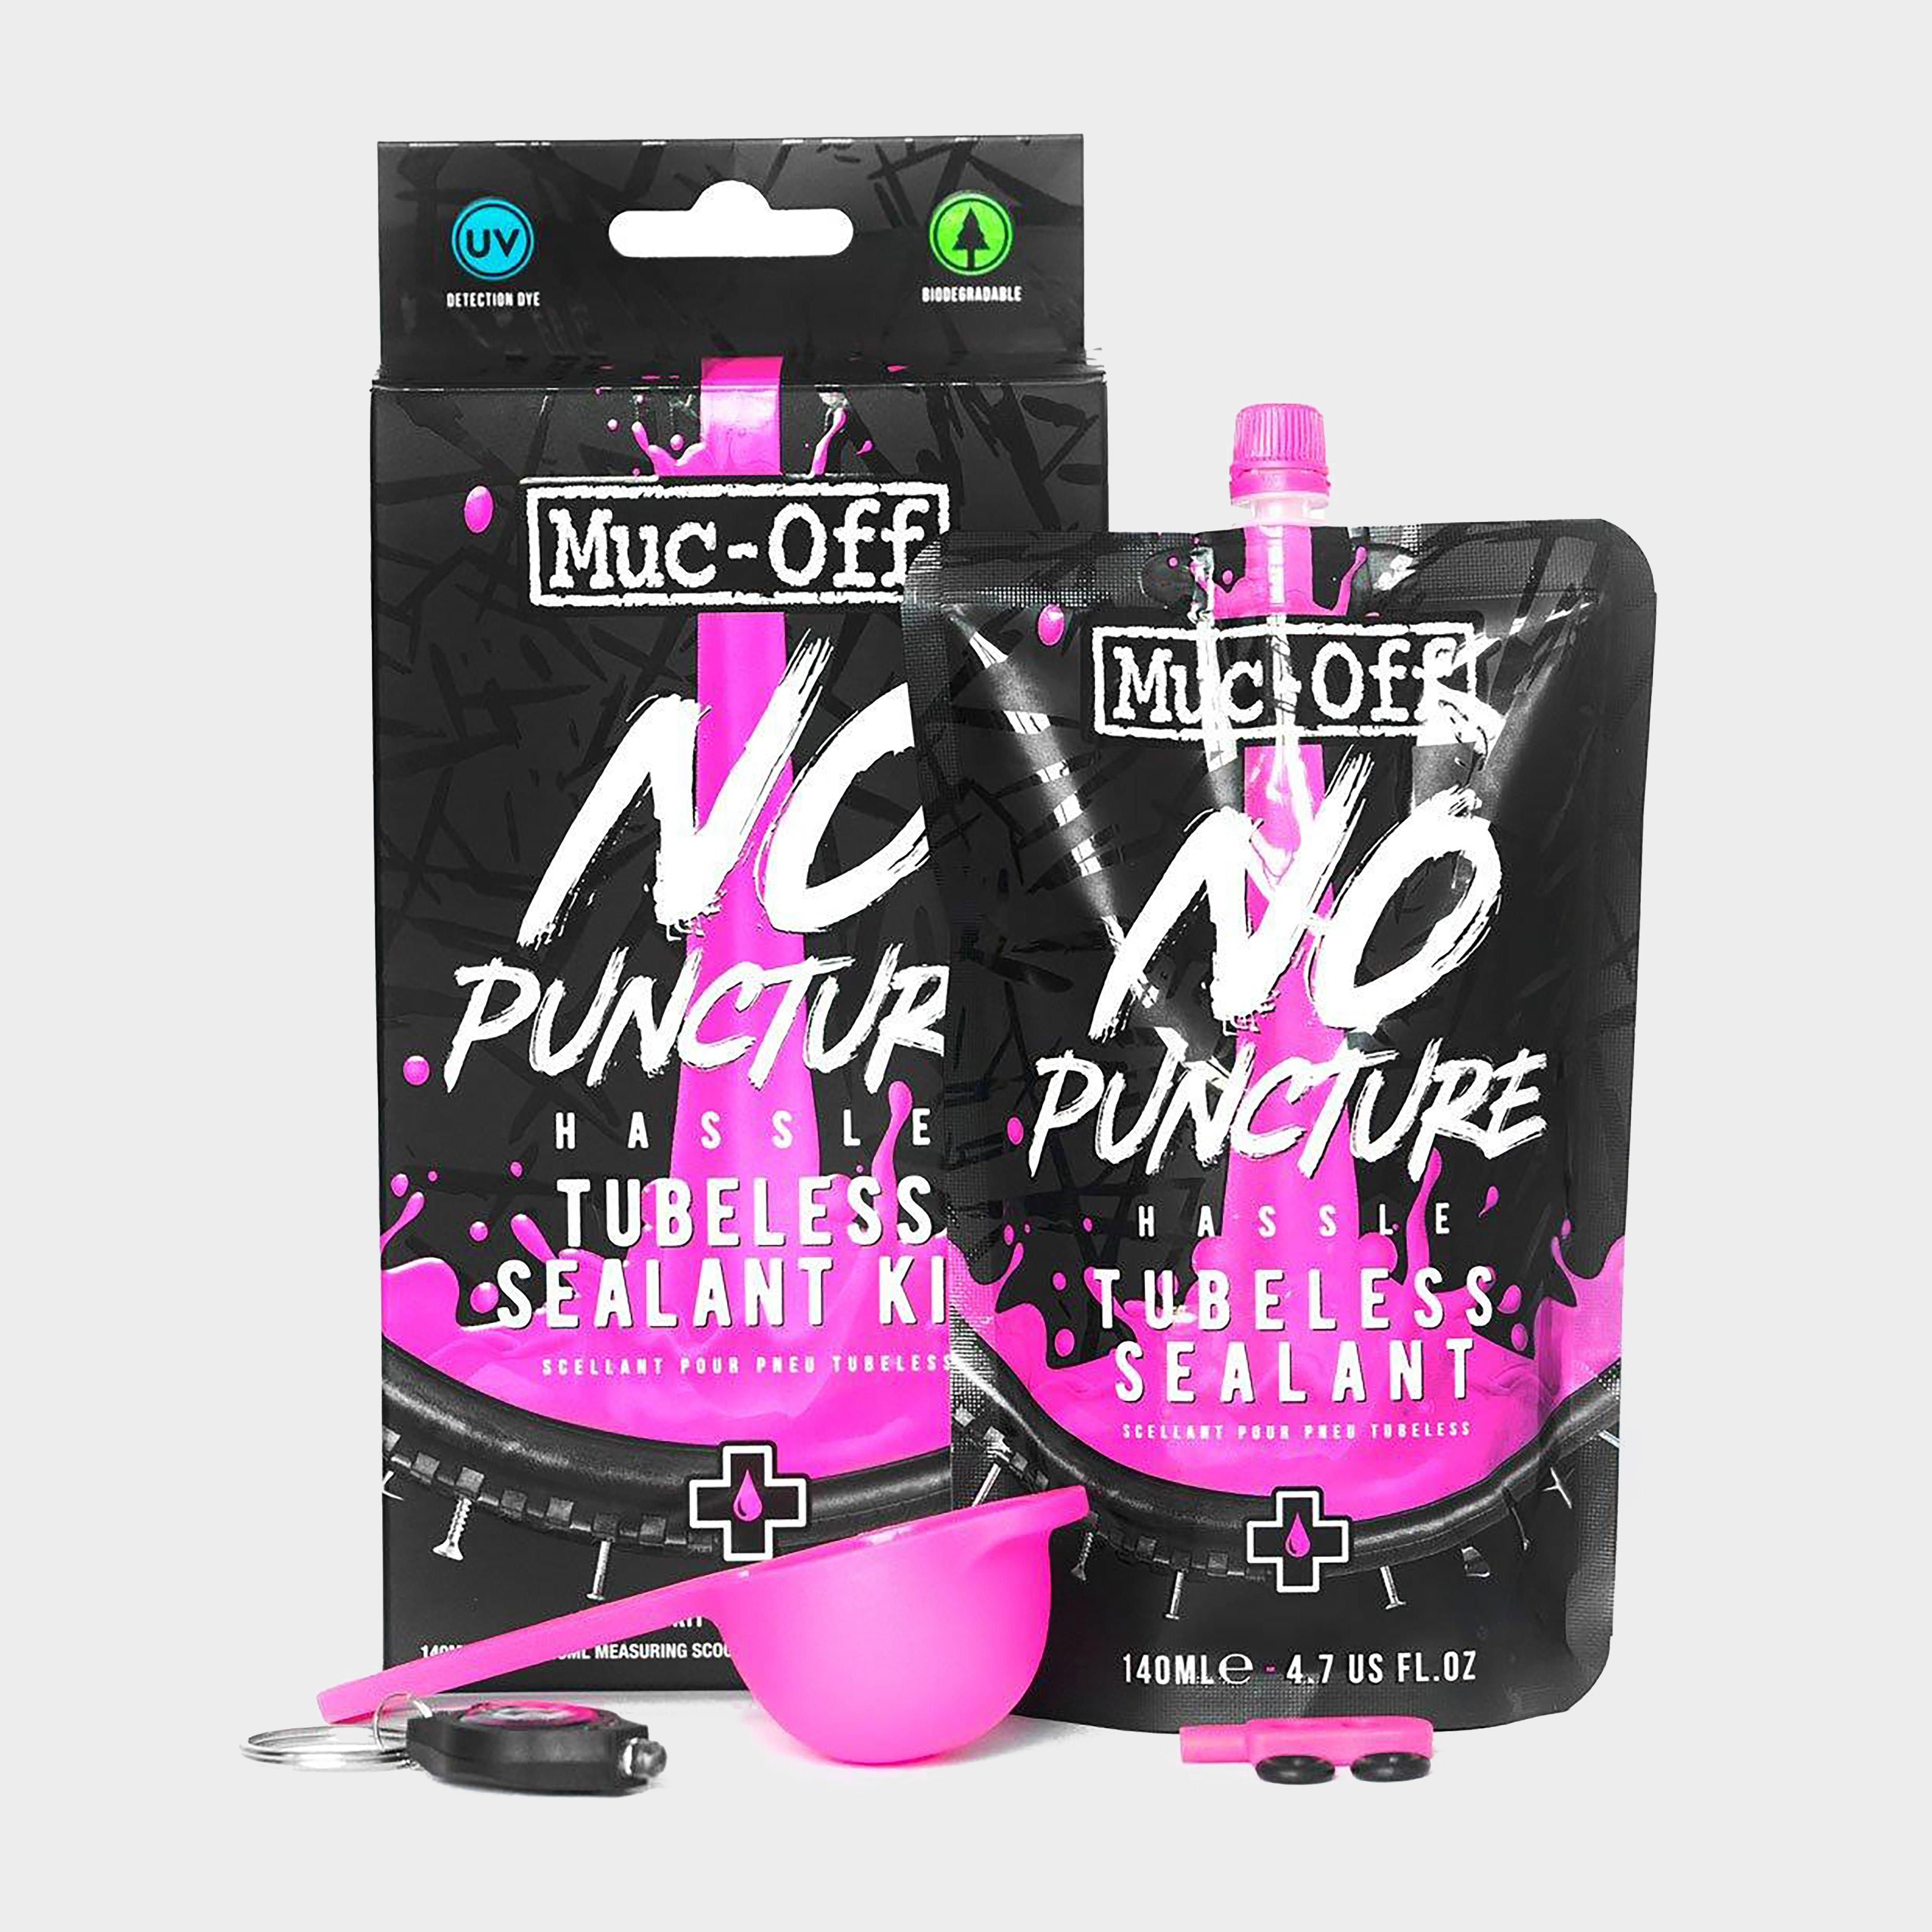 Muc Off No Puncture Hassle Tubeless Sealant (140ml Kit) - Pink/pink  Pink/pink